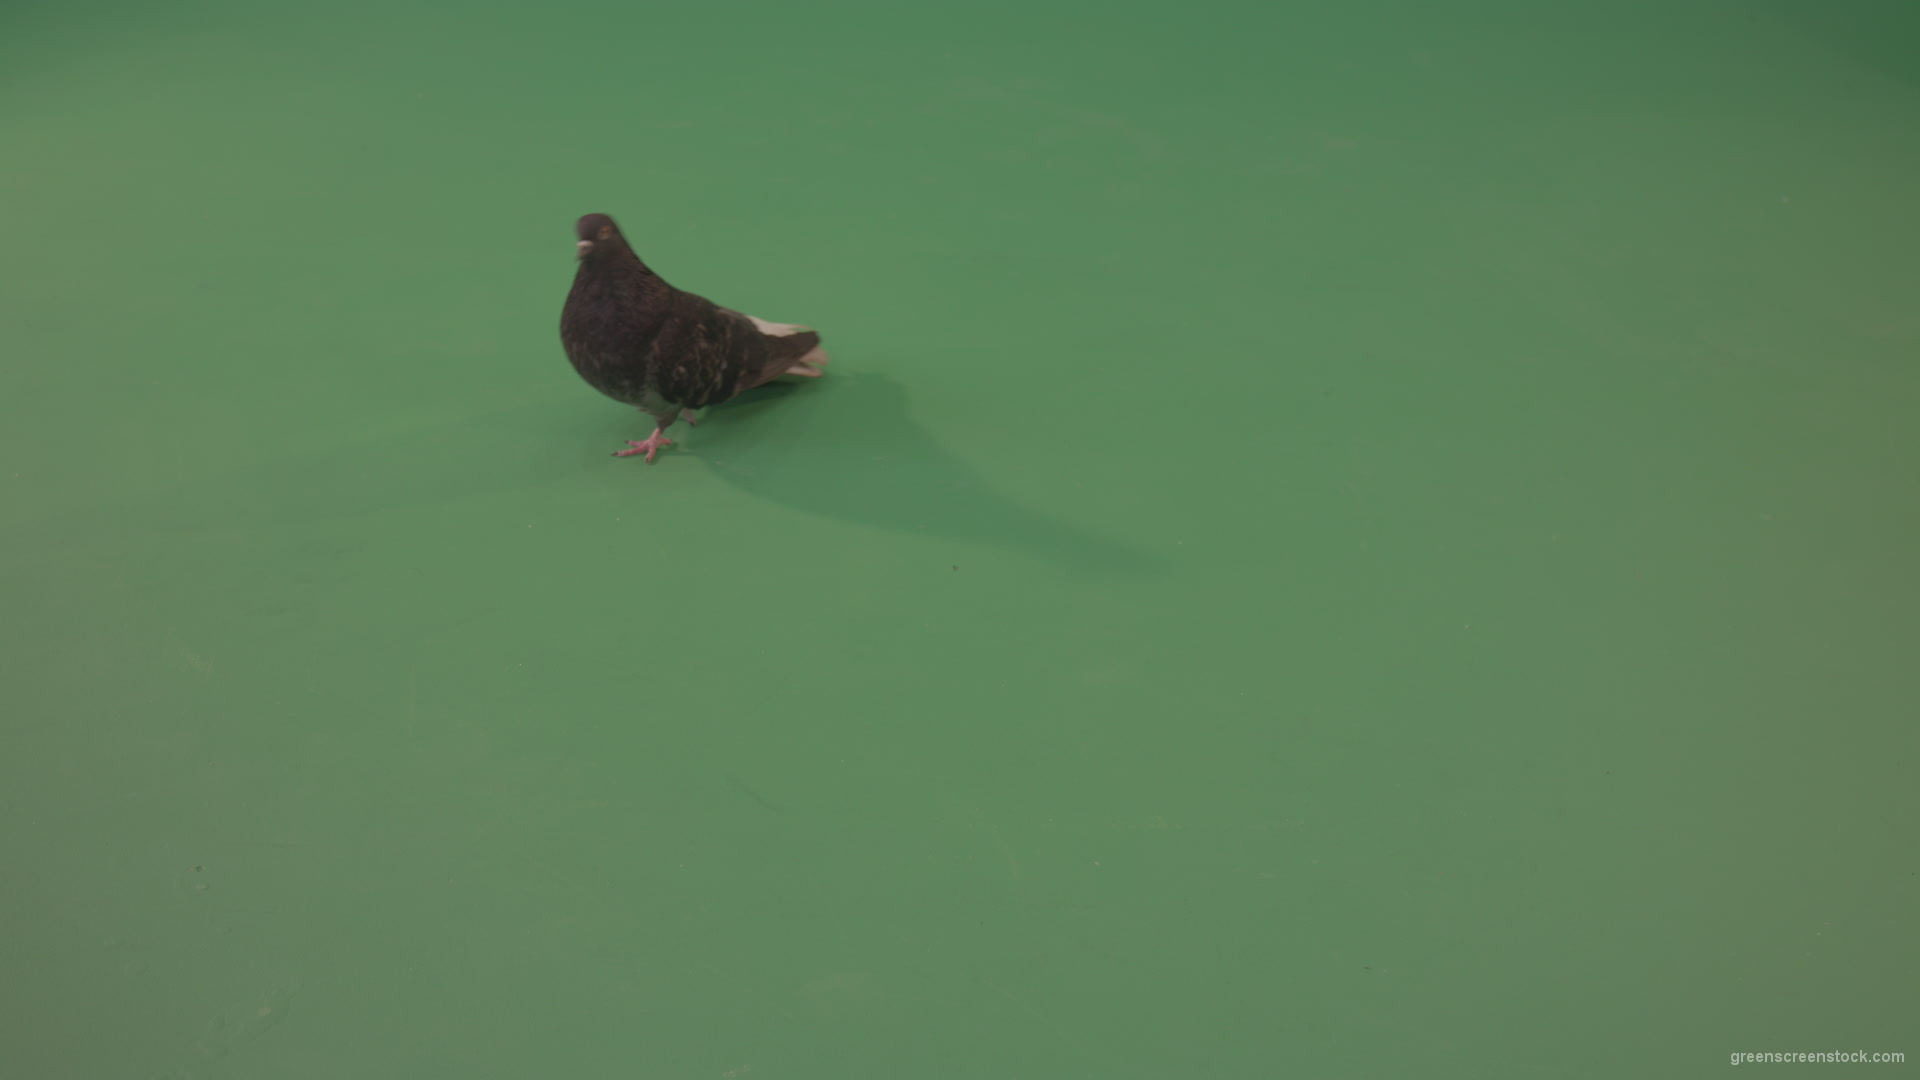 Dove-walking-along-the-road-in-a-big-city-isolated-on-chromakey-background_002 Green Screen Stock